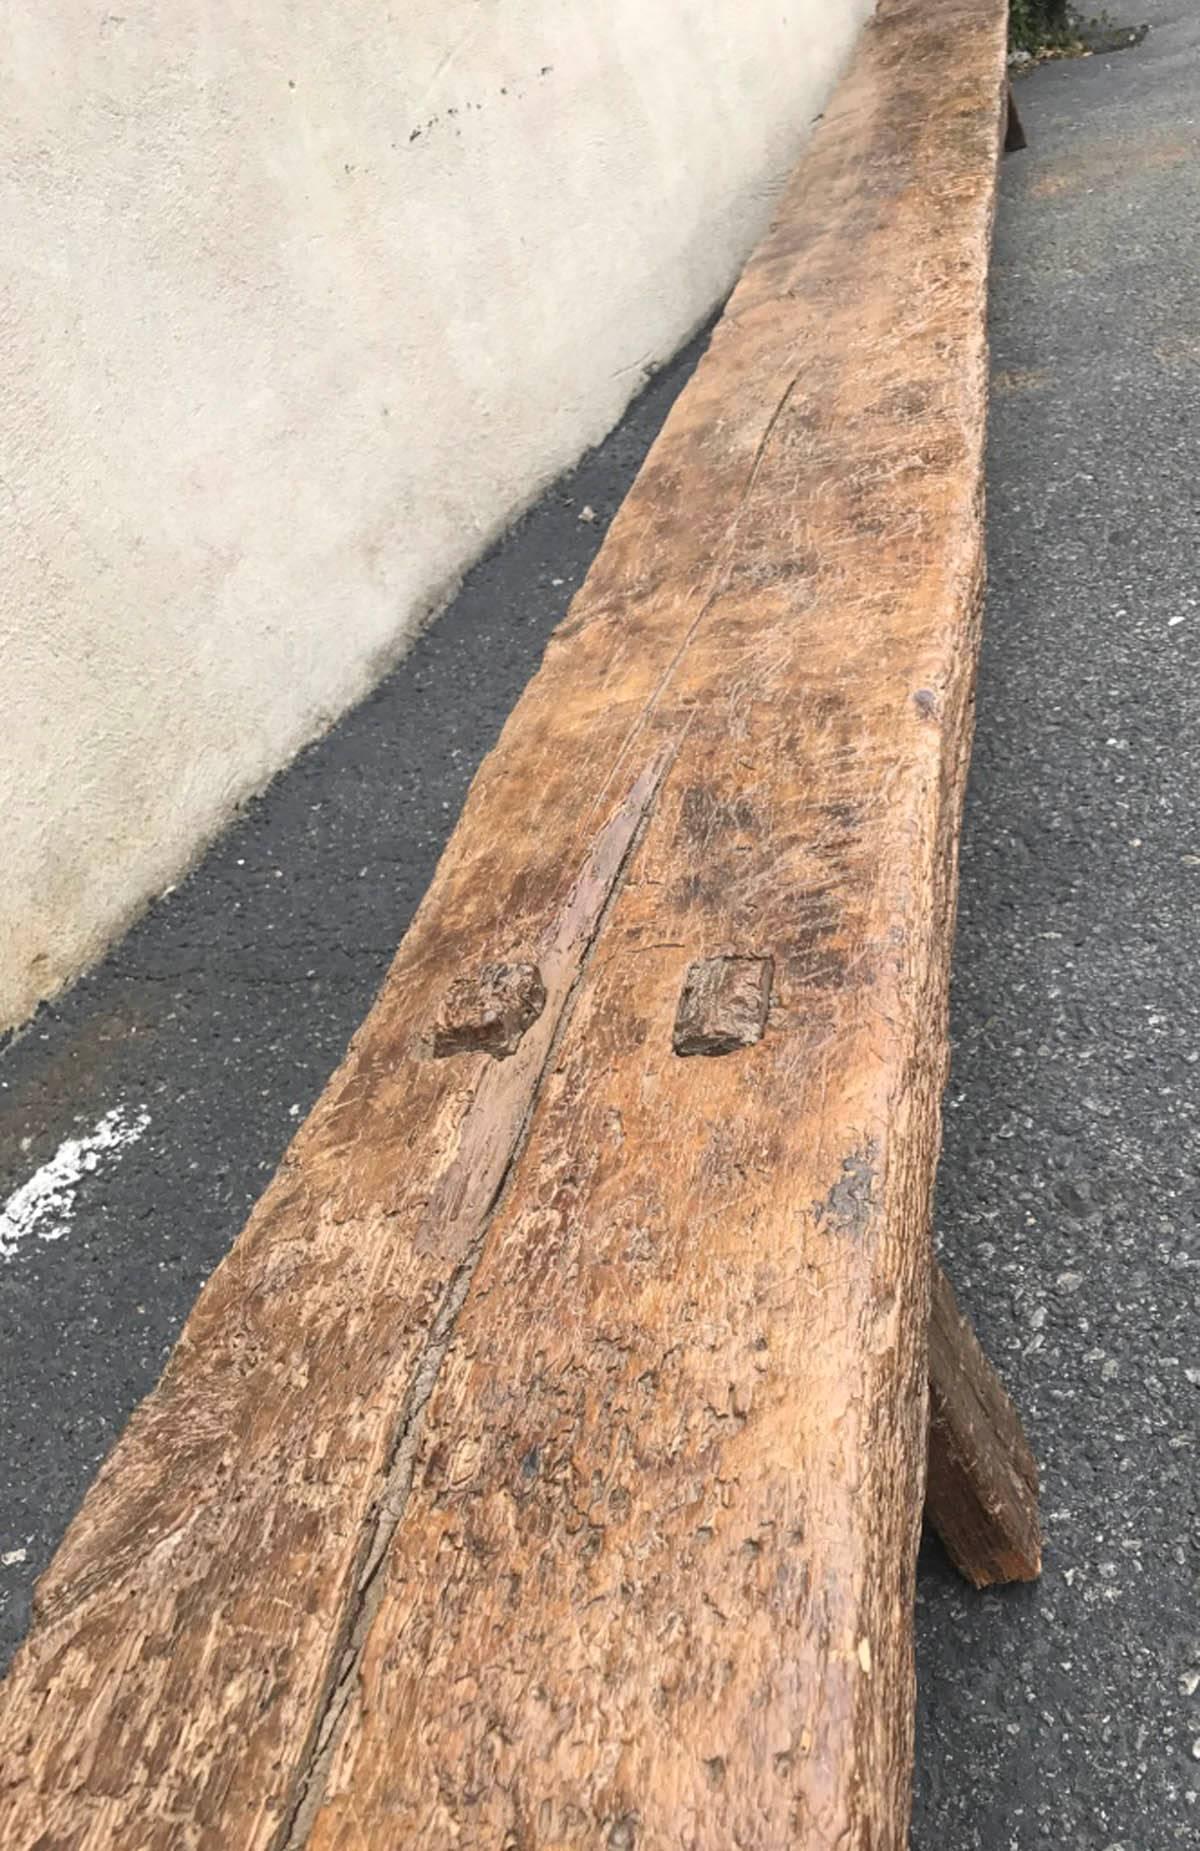 19th century low bench. One very long, 4 inch thick piece of wood with straight mortise and tenon constructed legs. Old, natural patina. Sturdy, with cracks and age appropriate wear.
Very Primitive modern. Very Axel Vervoordt.